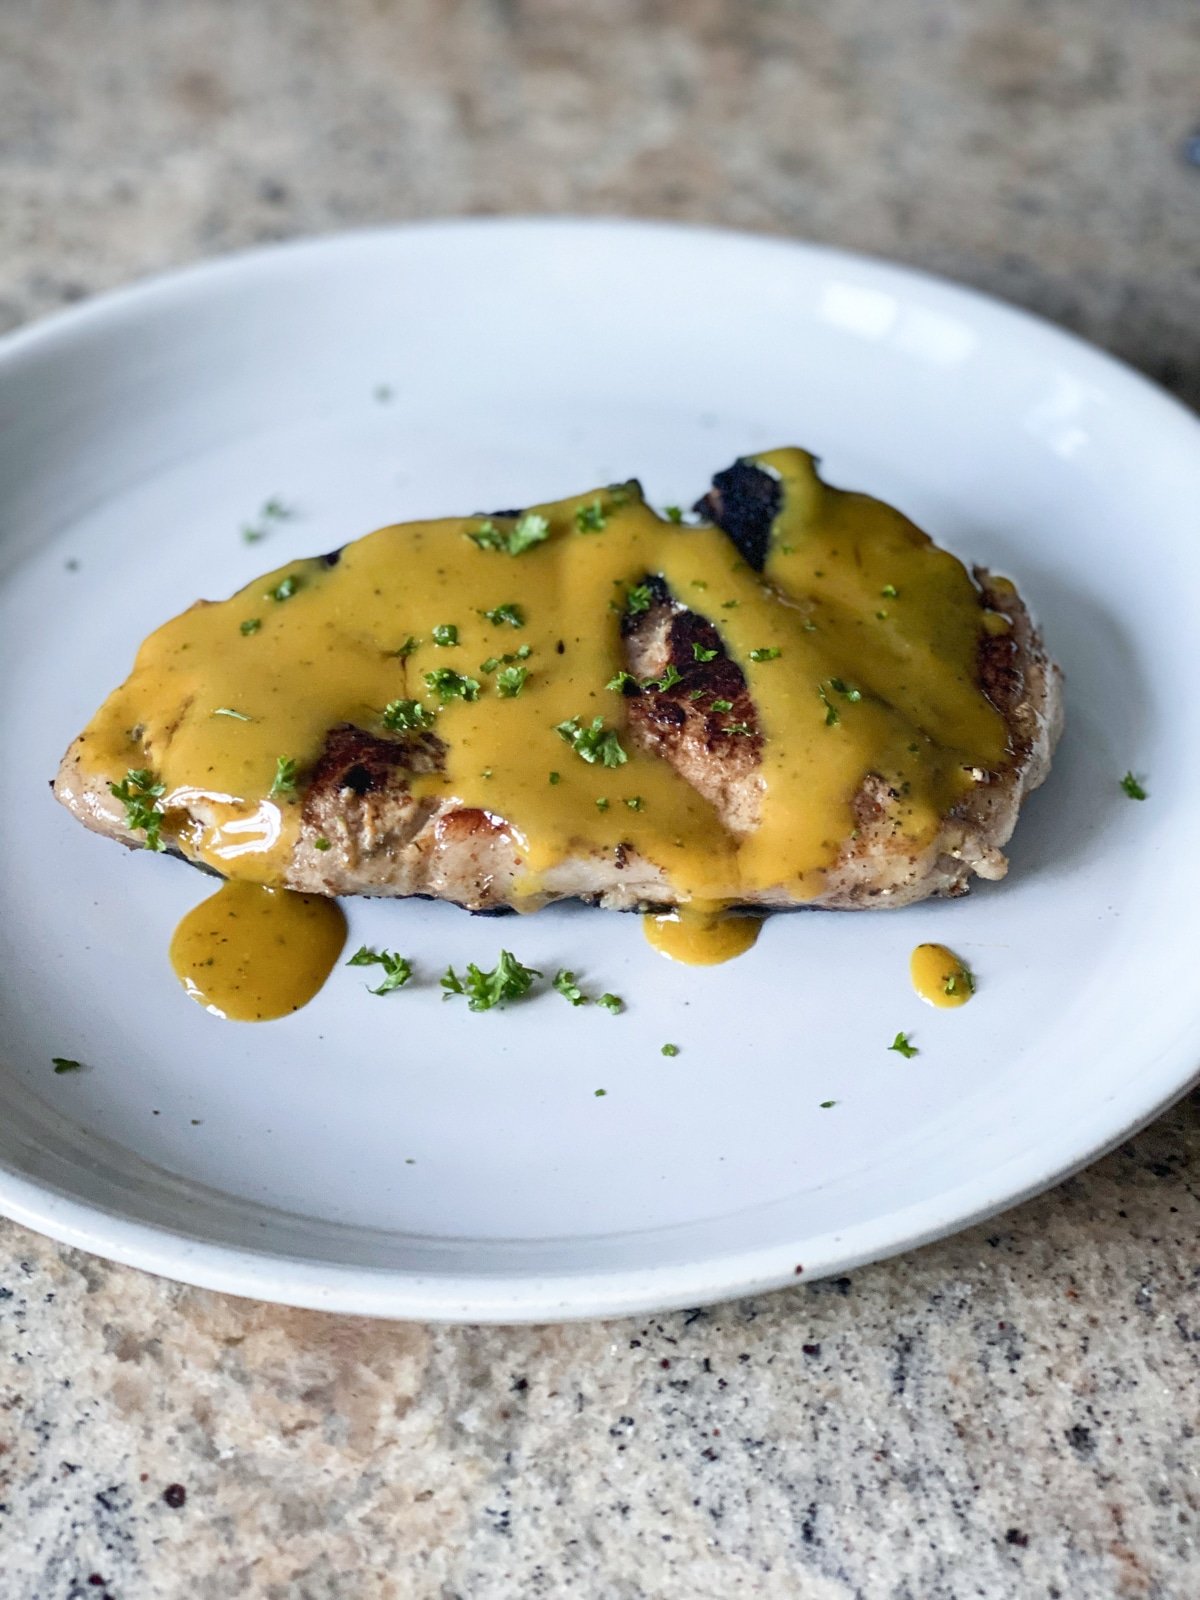 sous vide pork chops recipe with yellow bbq sauce and herbs